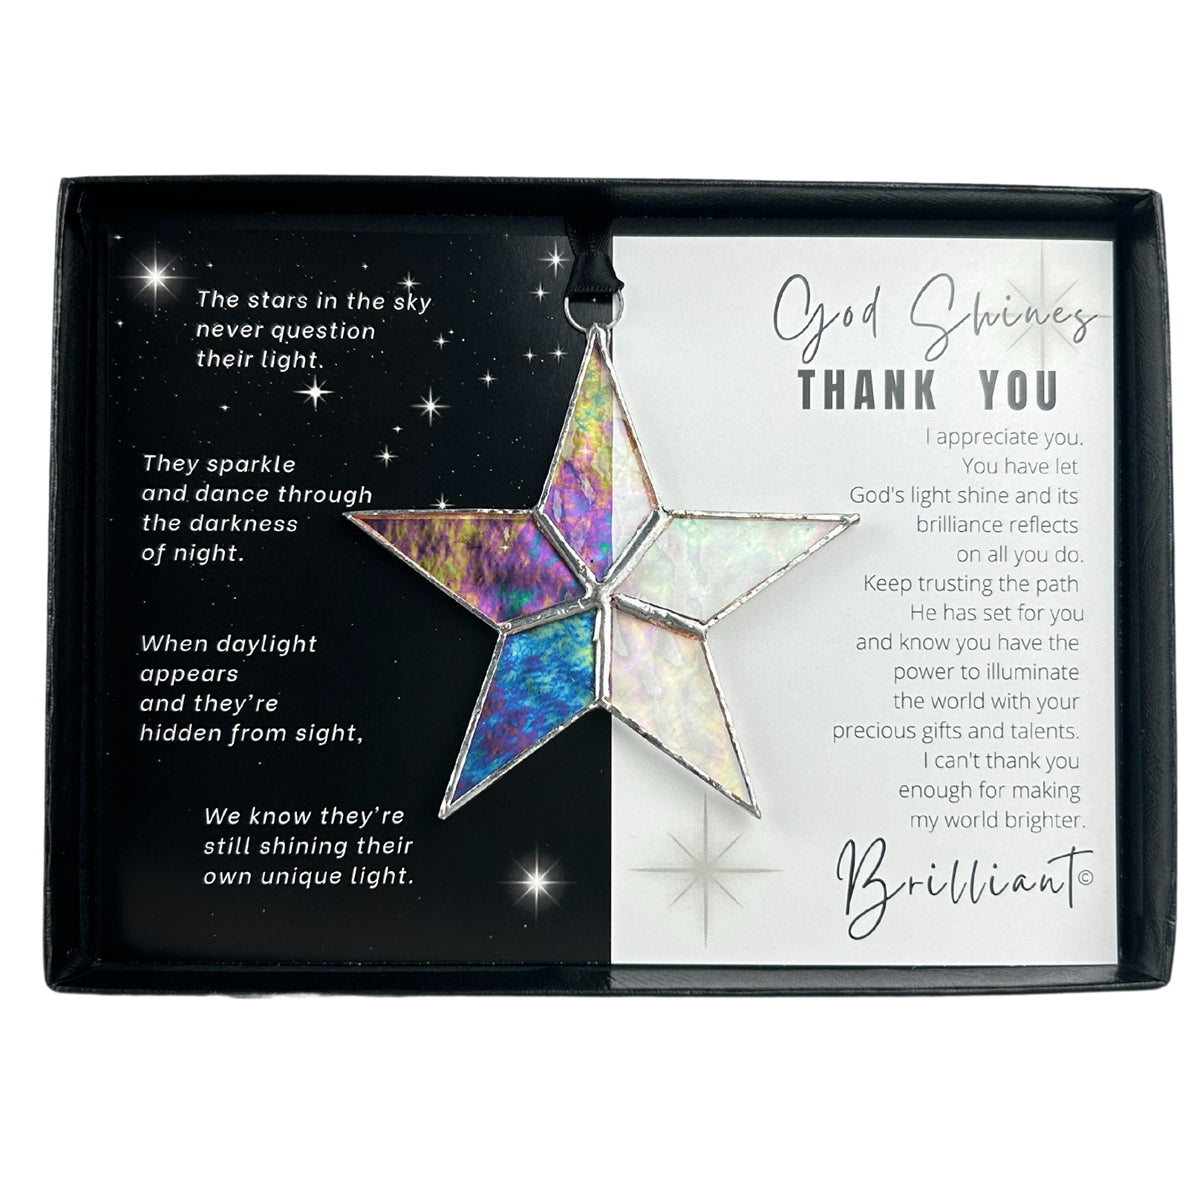 Handmade 4" clear iridescent stained glass star with silver edging, packaged with "God Shines Thank You" sentiment in black gift box with clear lid.